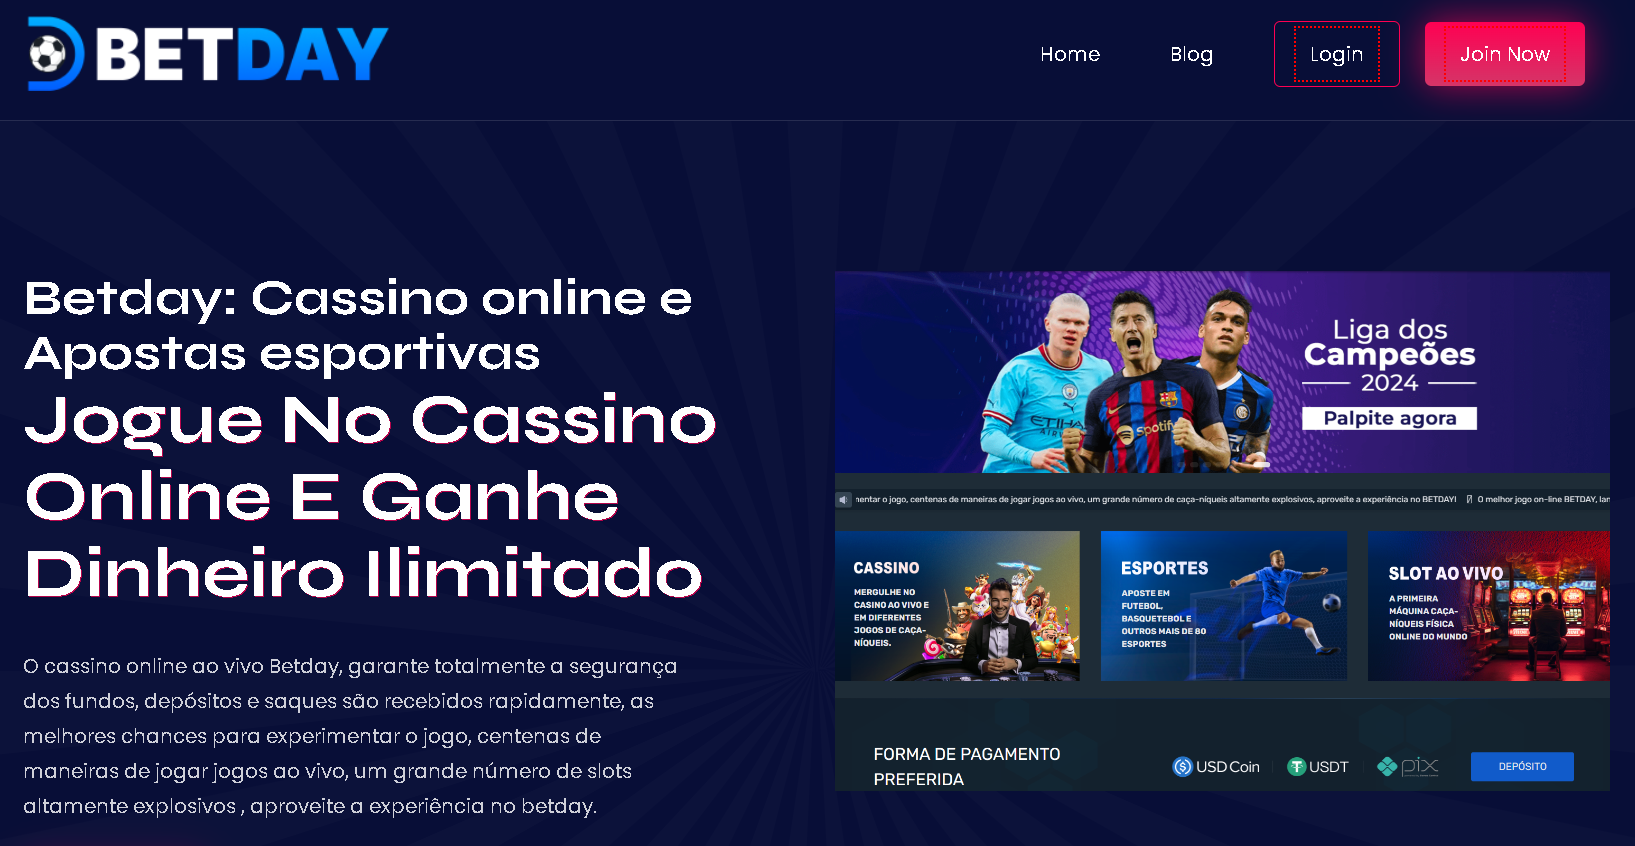 The Advantages Of Playing at Betday Cassino Online